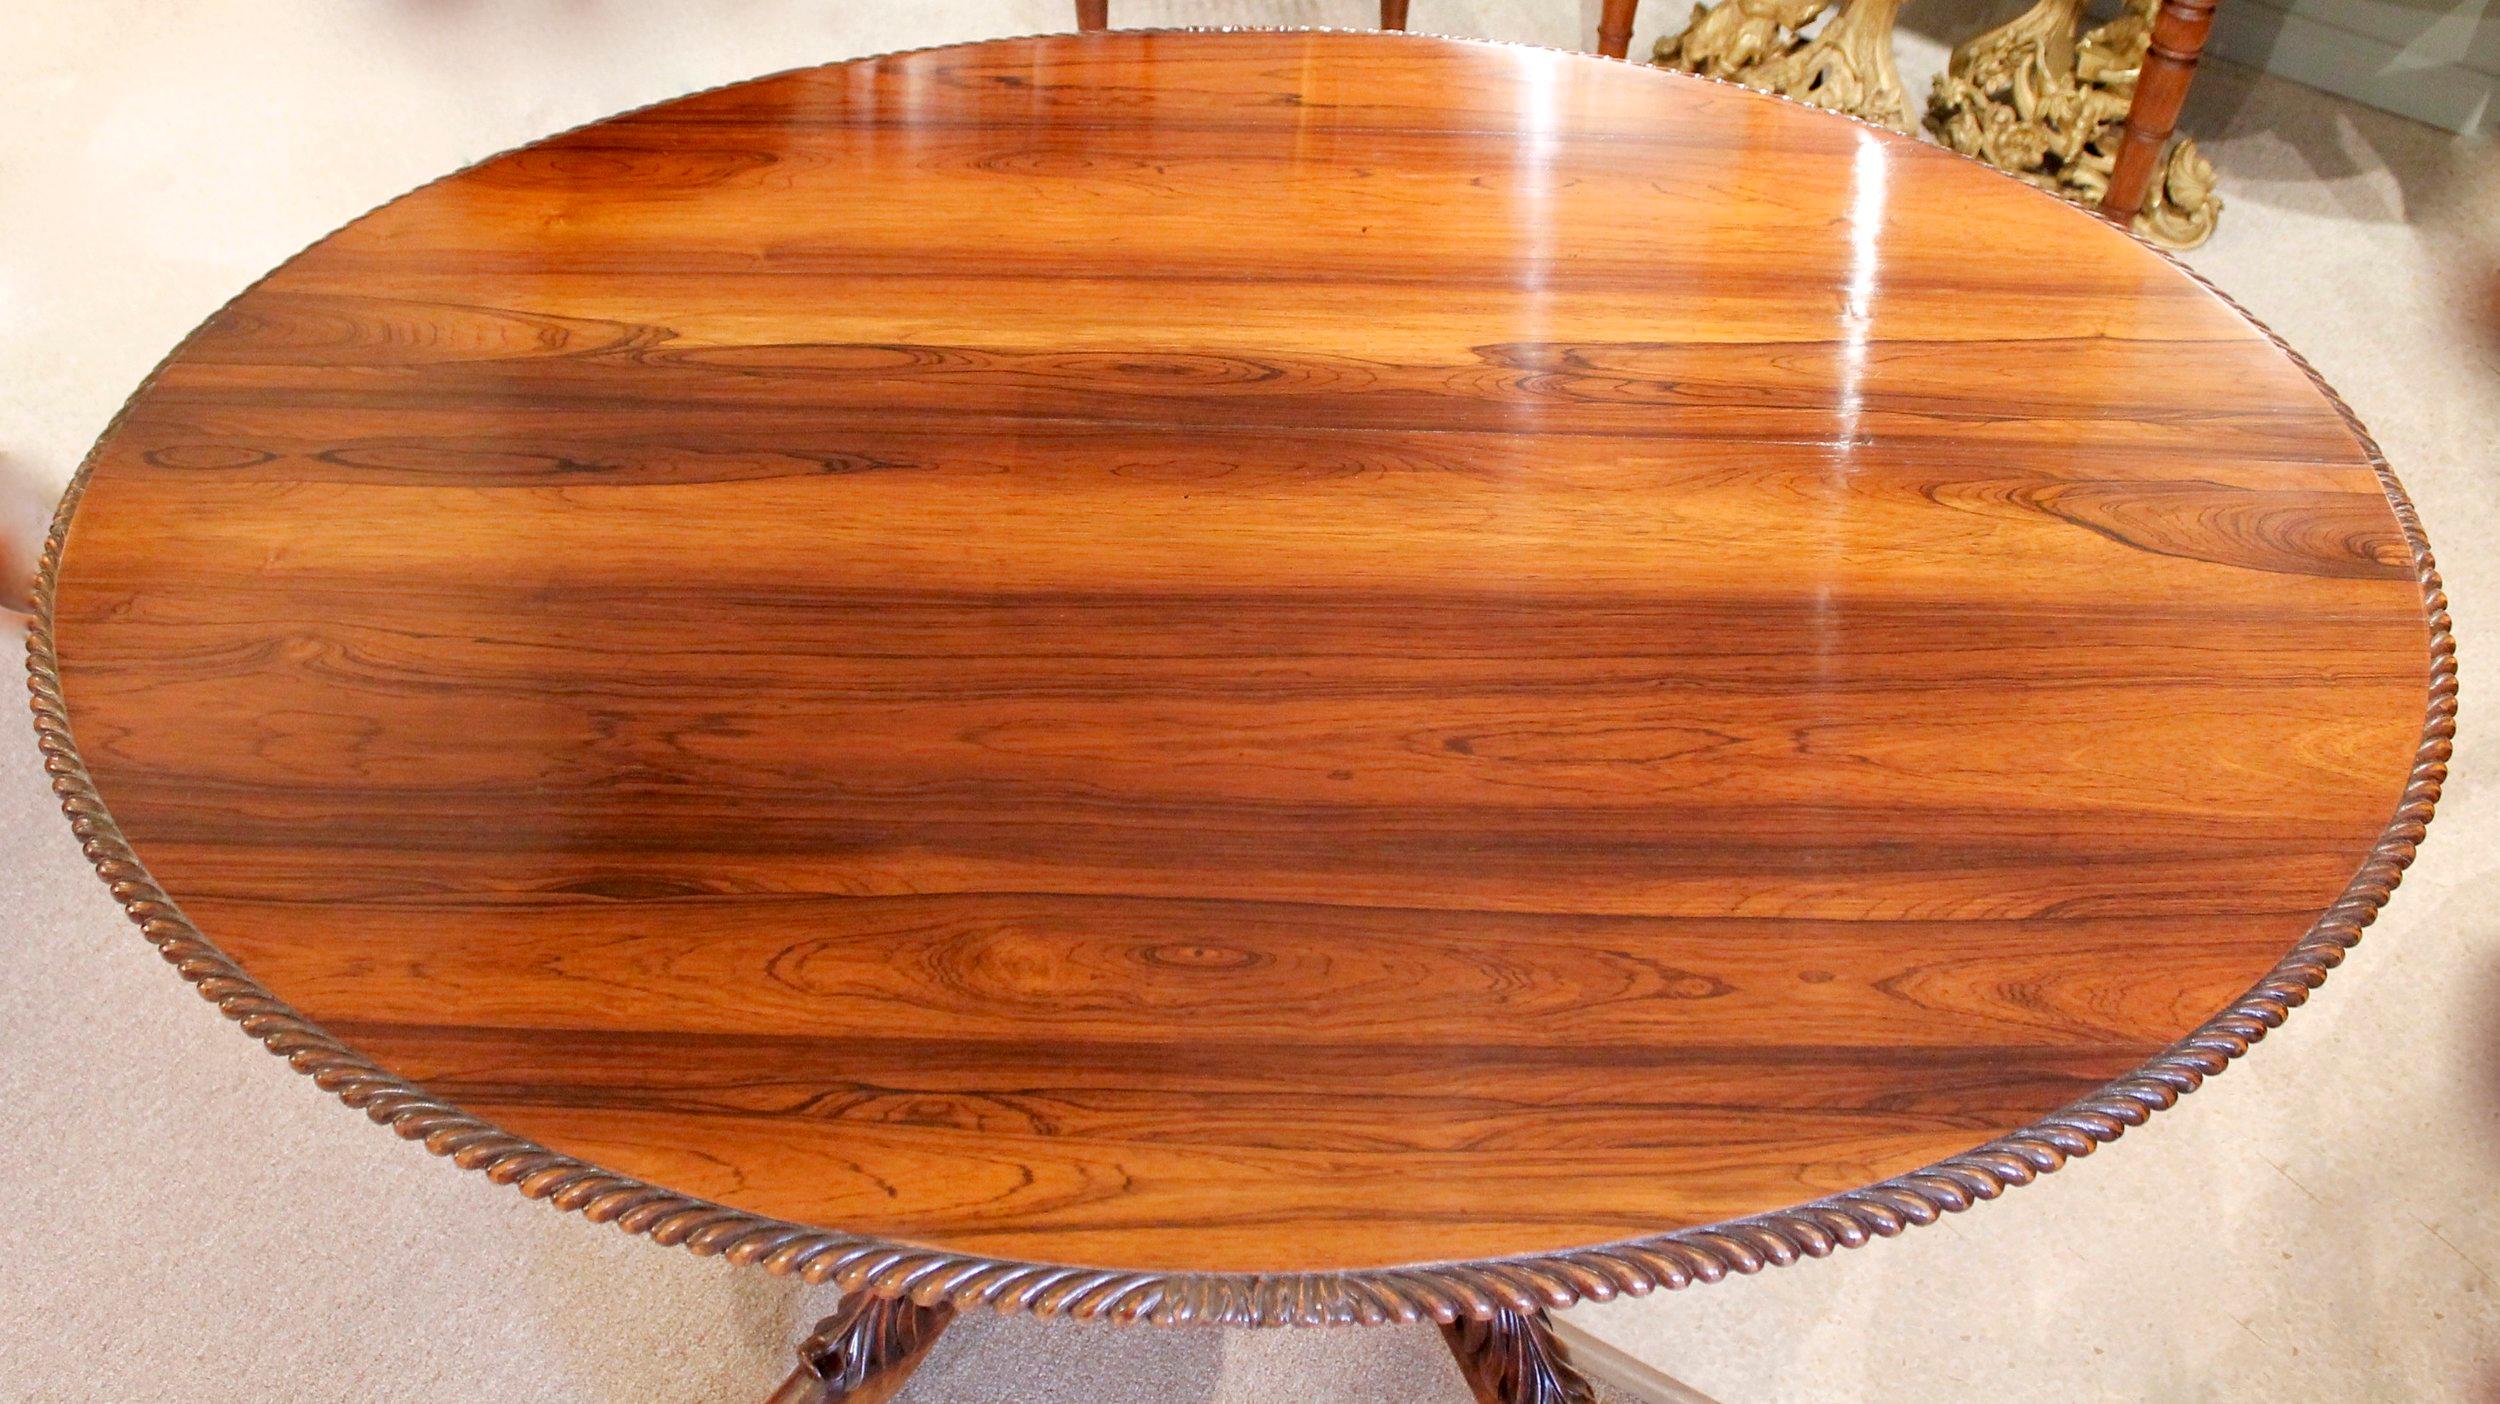 A remarkable and stylish tilt top table of solid rosewood timber. The extraordinarily fine figured top is edged with gadroon carving. The pedestal is composed of a boldly carved spiral twist terminating in four deeply carved acanthus topped